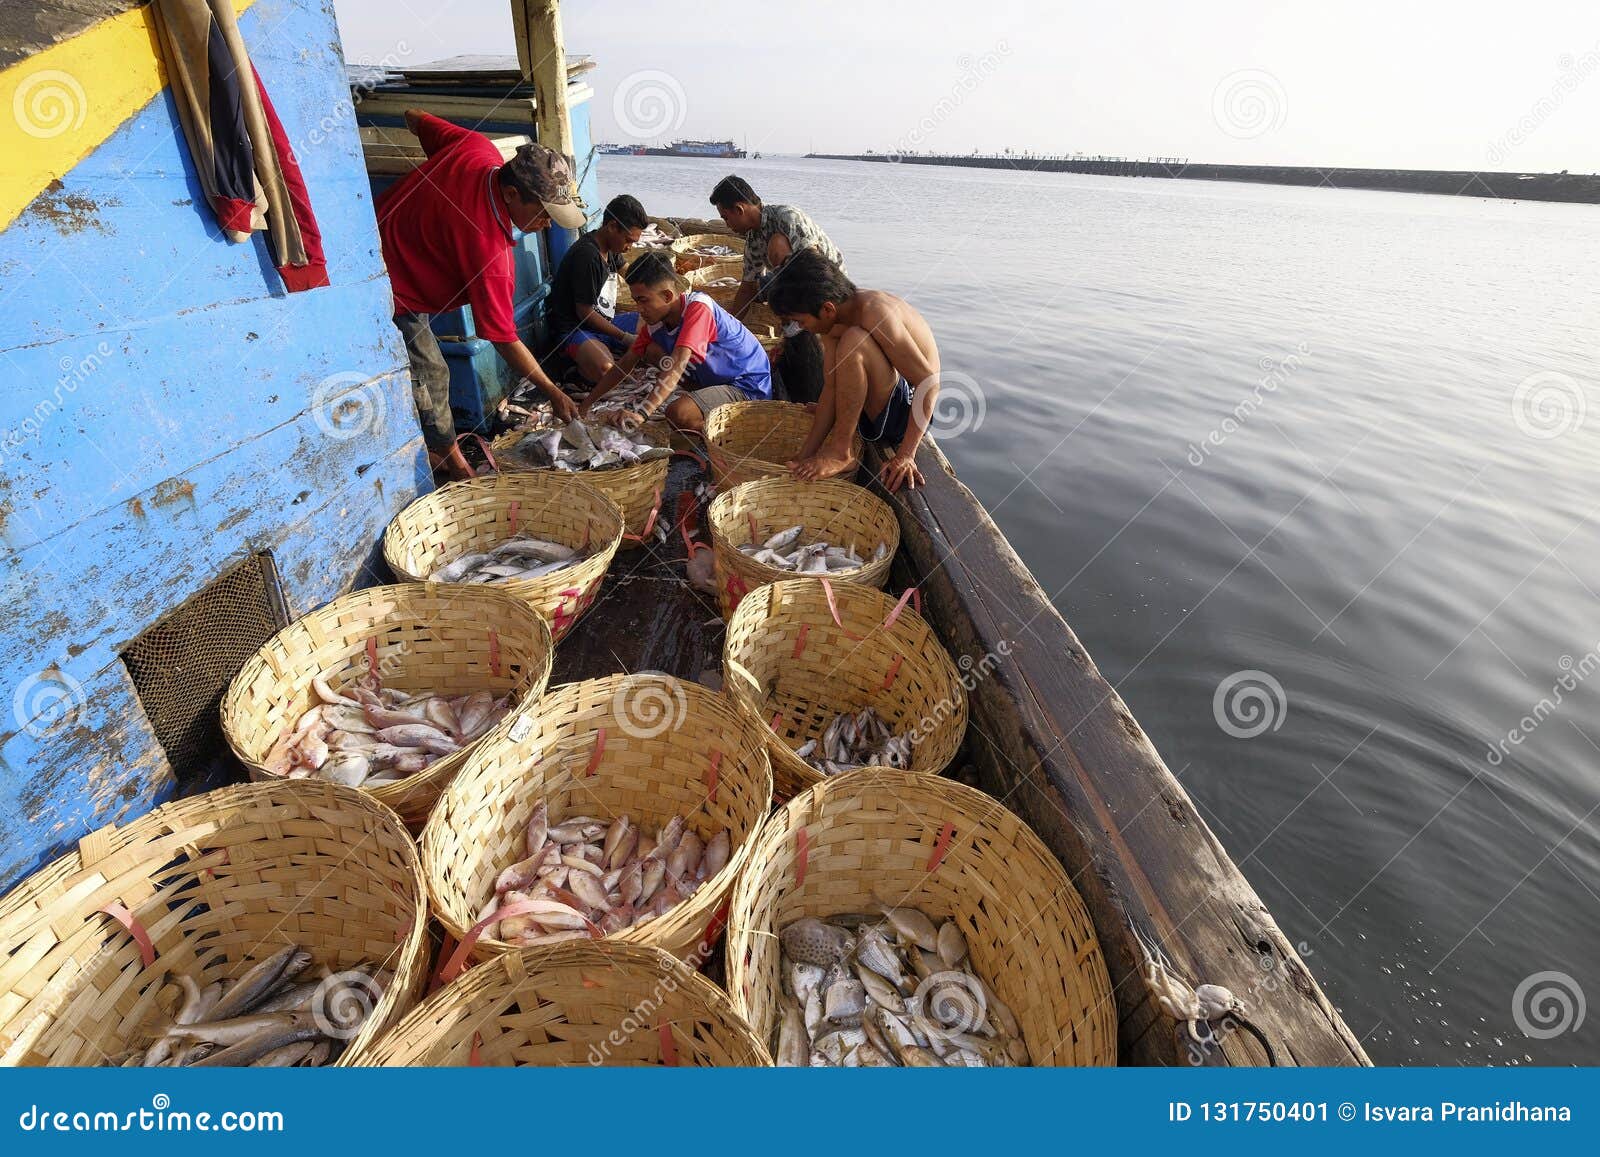 Fishing Activities on the Boat Editorial Photo - Image of activities,  fishing: 131750401